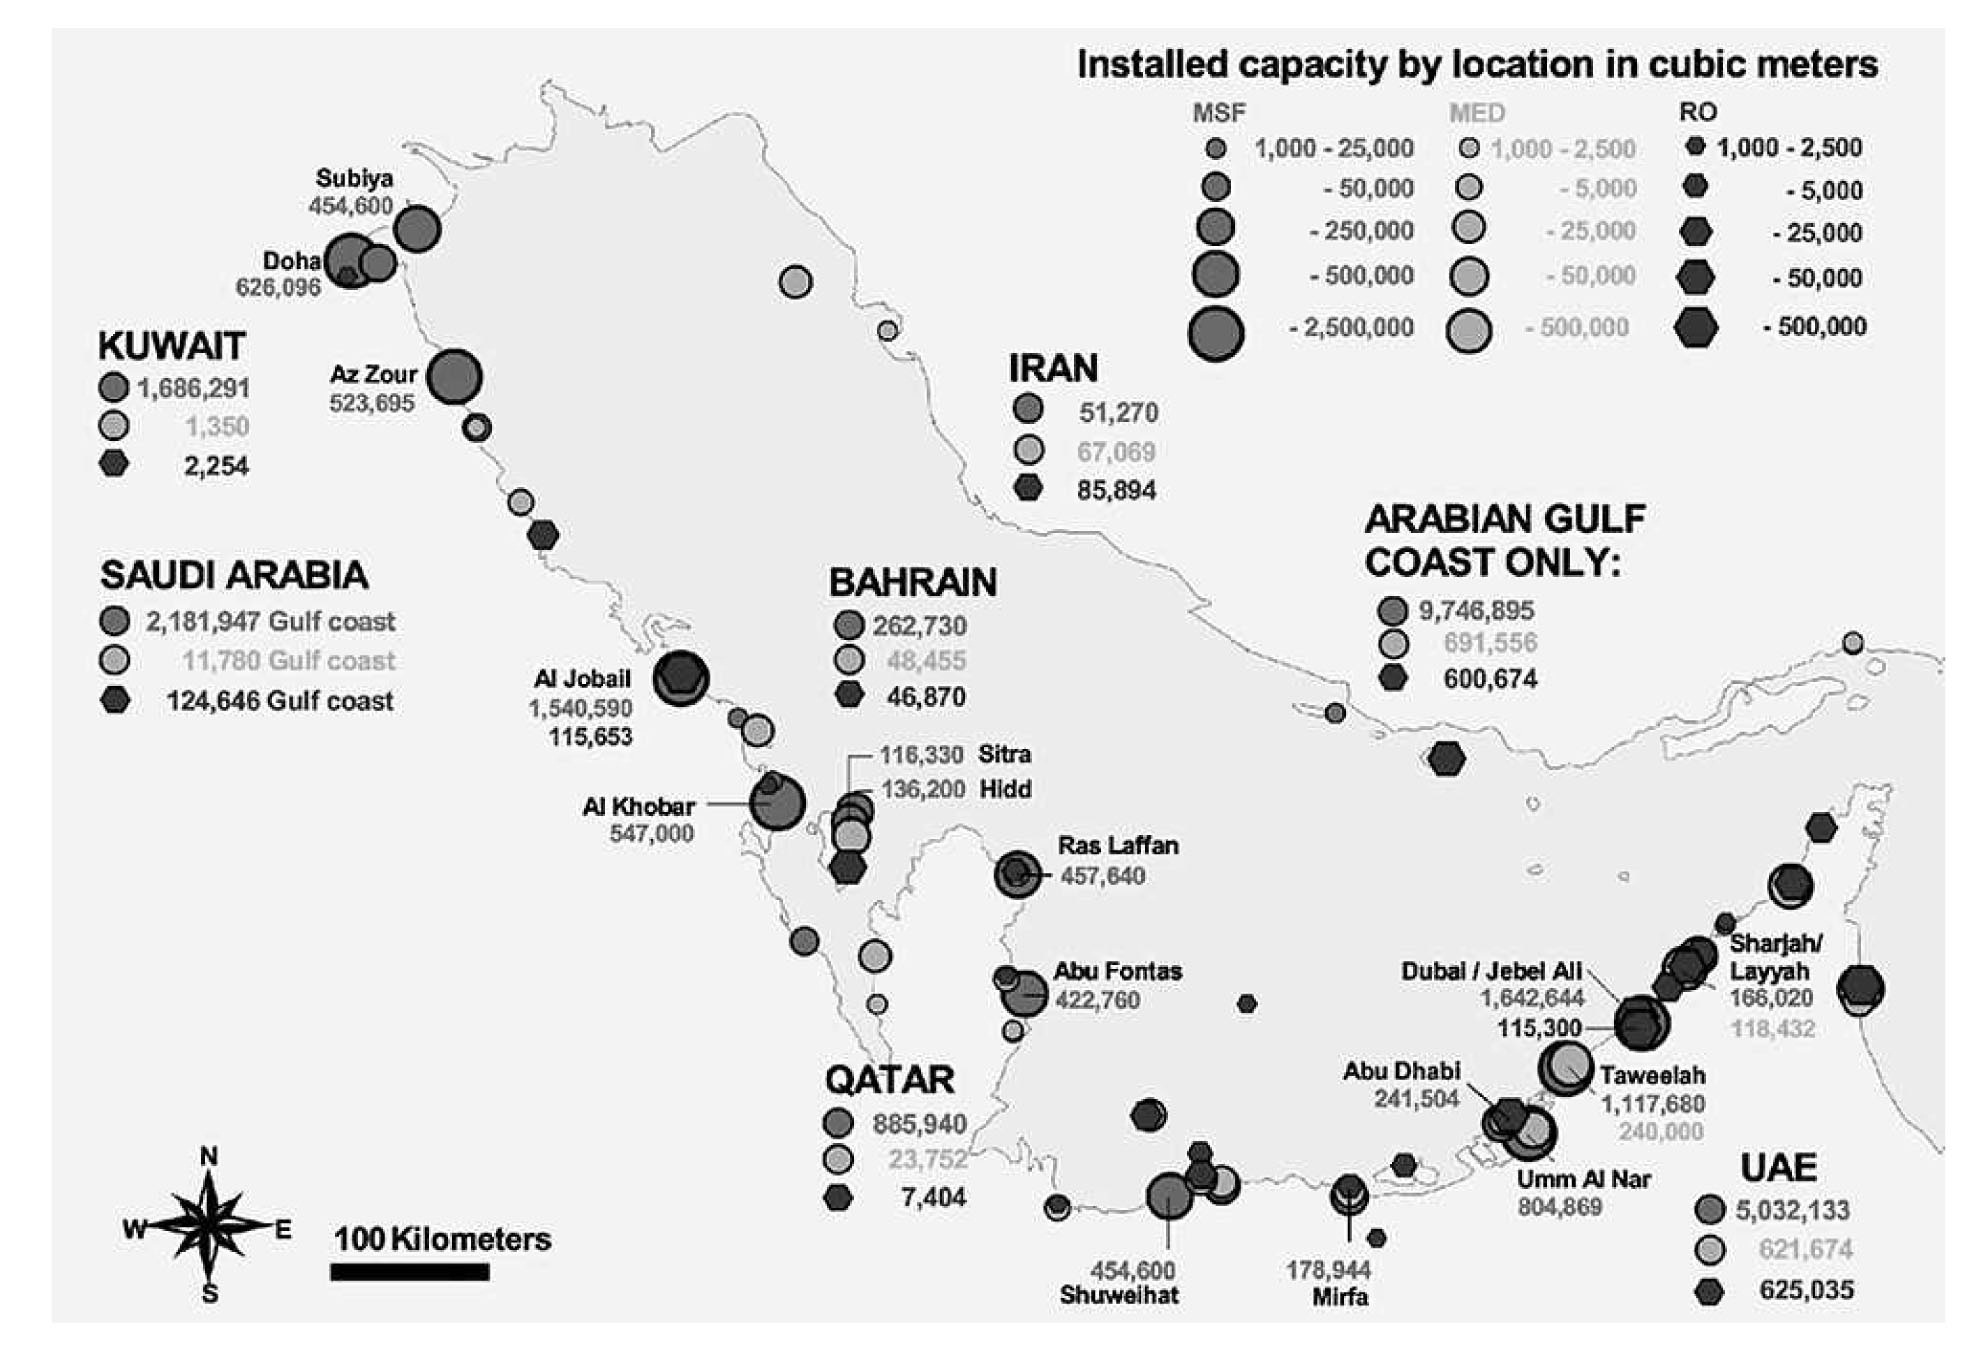 Map of Desalination and Power Plant Facilities in the Arabian Gulf Showing the Installed Capacities for 3 types of Desalination Plants4